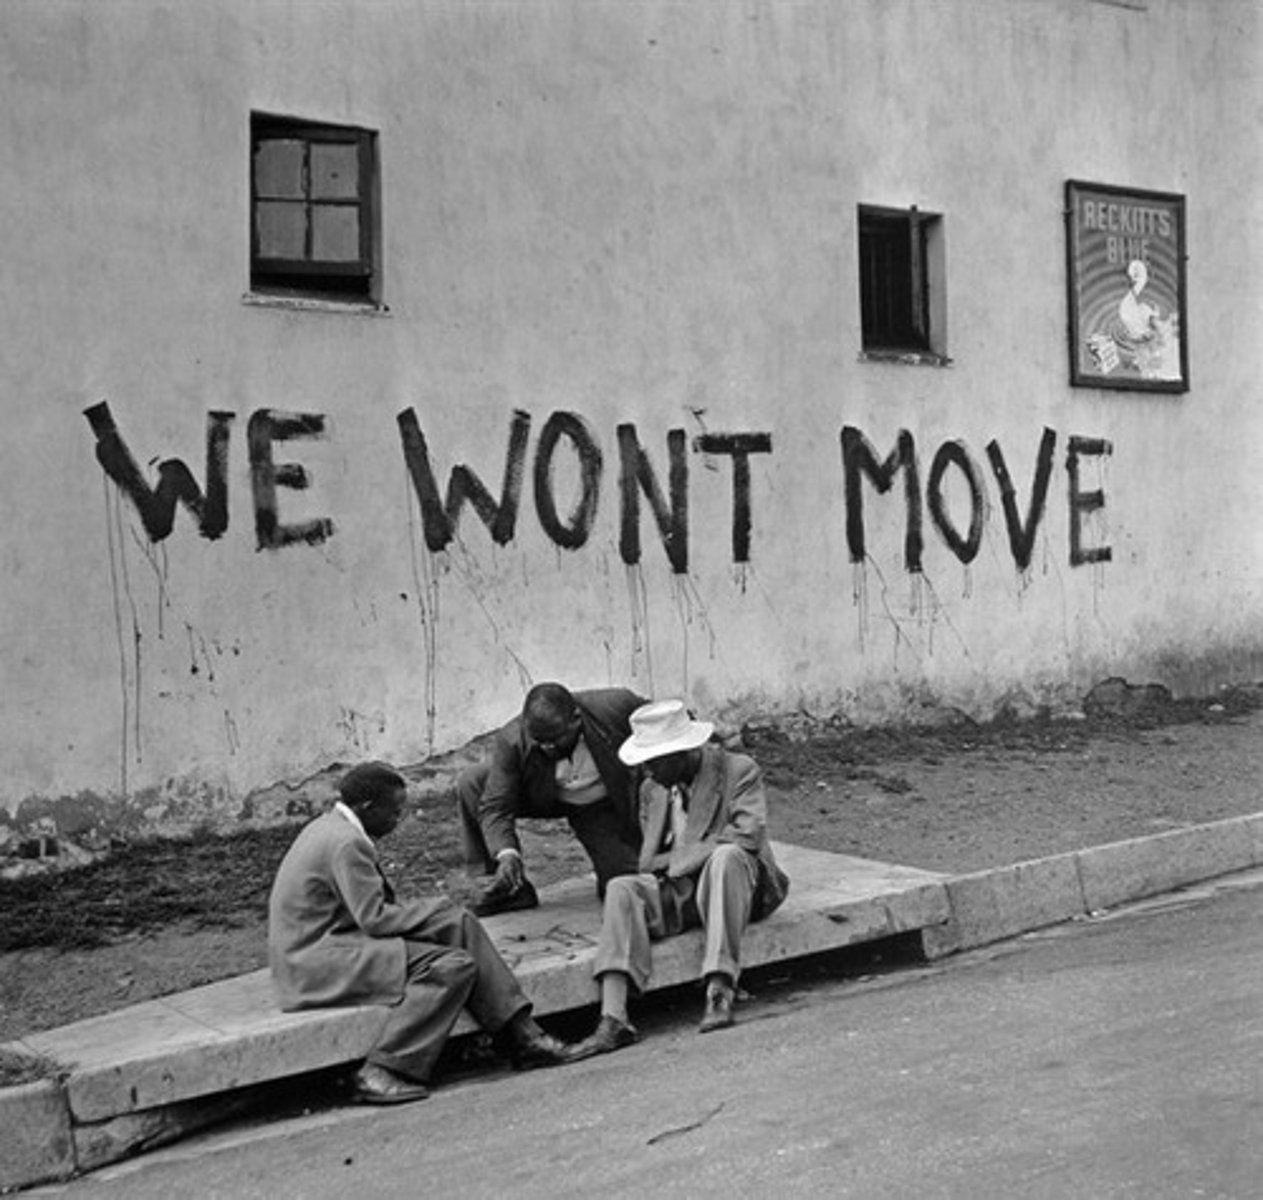 <p>Johannesburg township, center of black cultural life, cleared out by authorities because of its proximity to white suburbs</p>